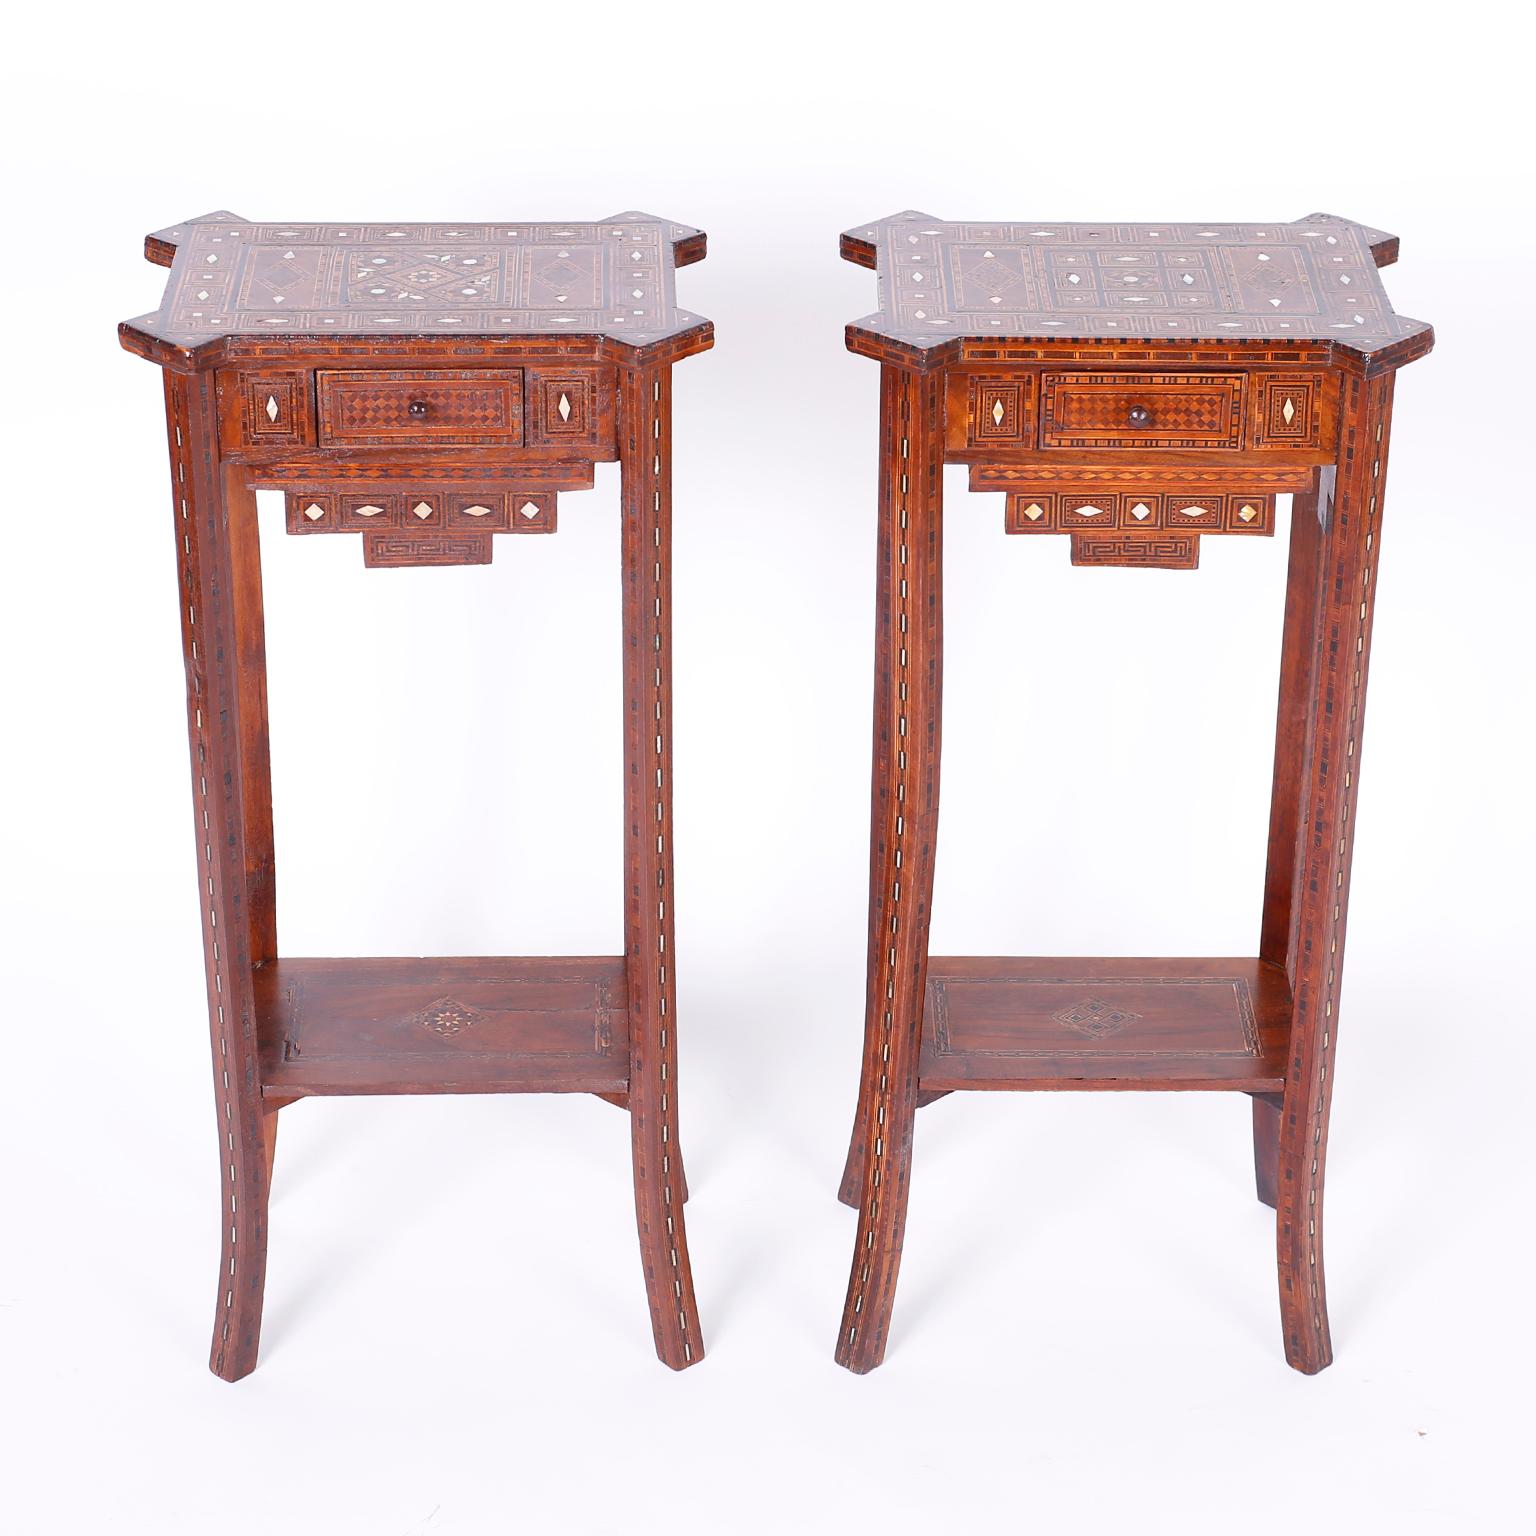 Moorish Pair of Antique Syrian Inlaid Stands or Tables